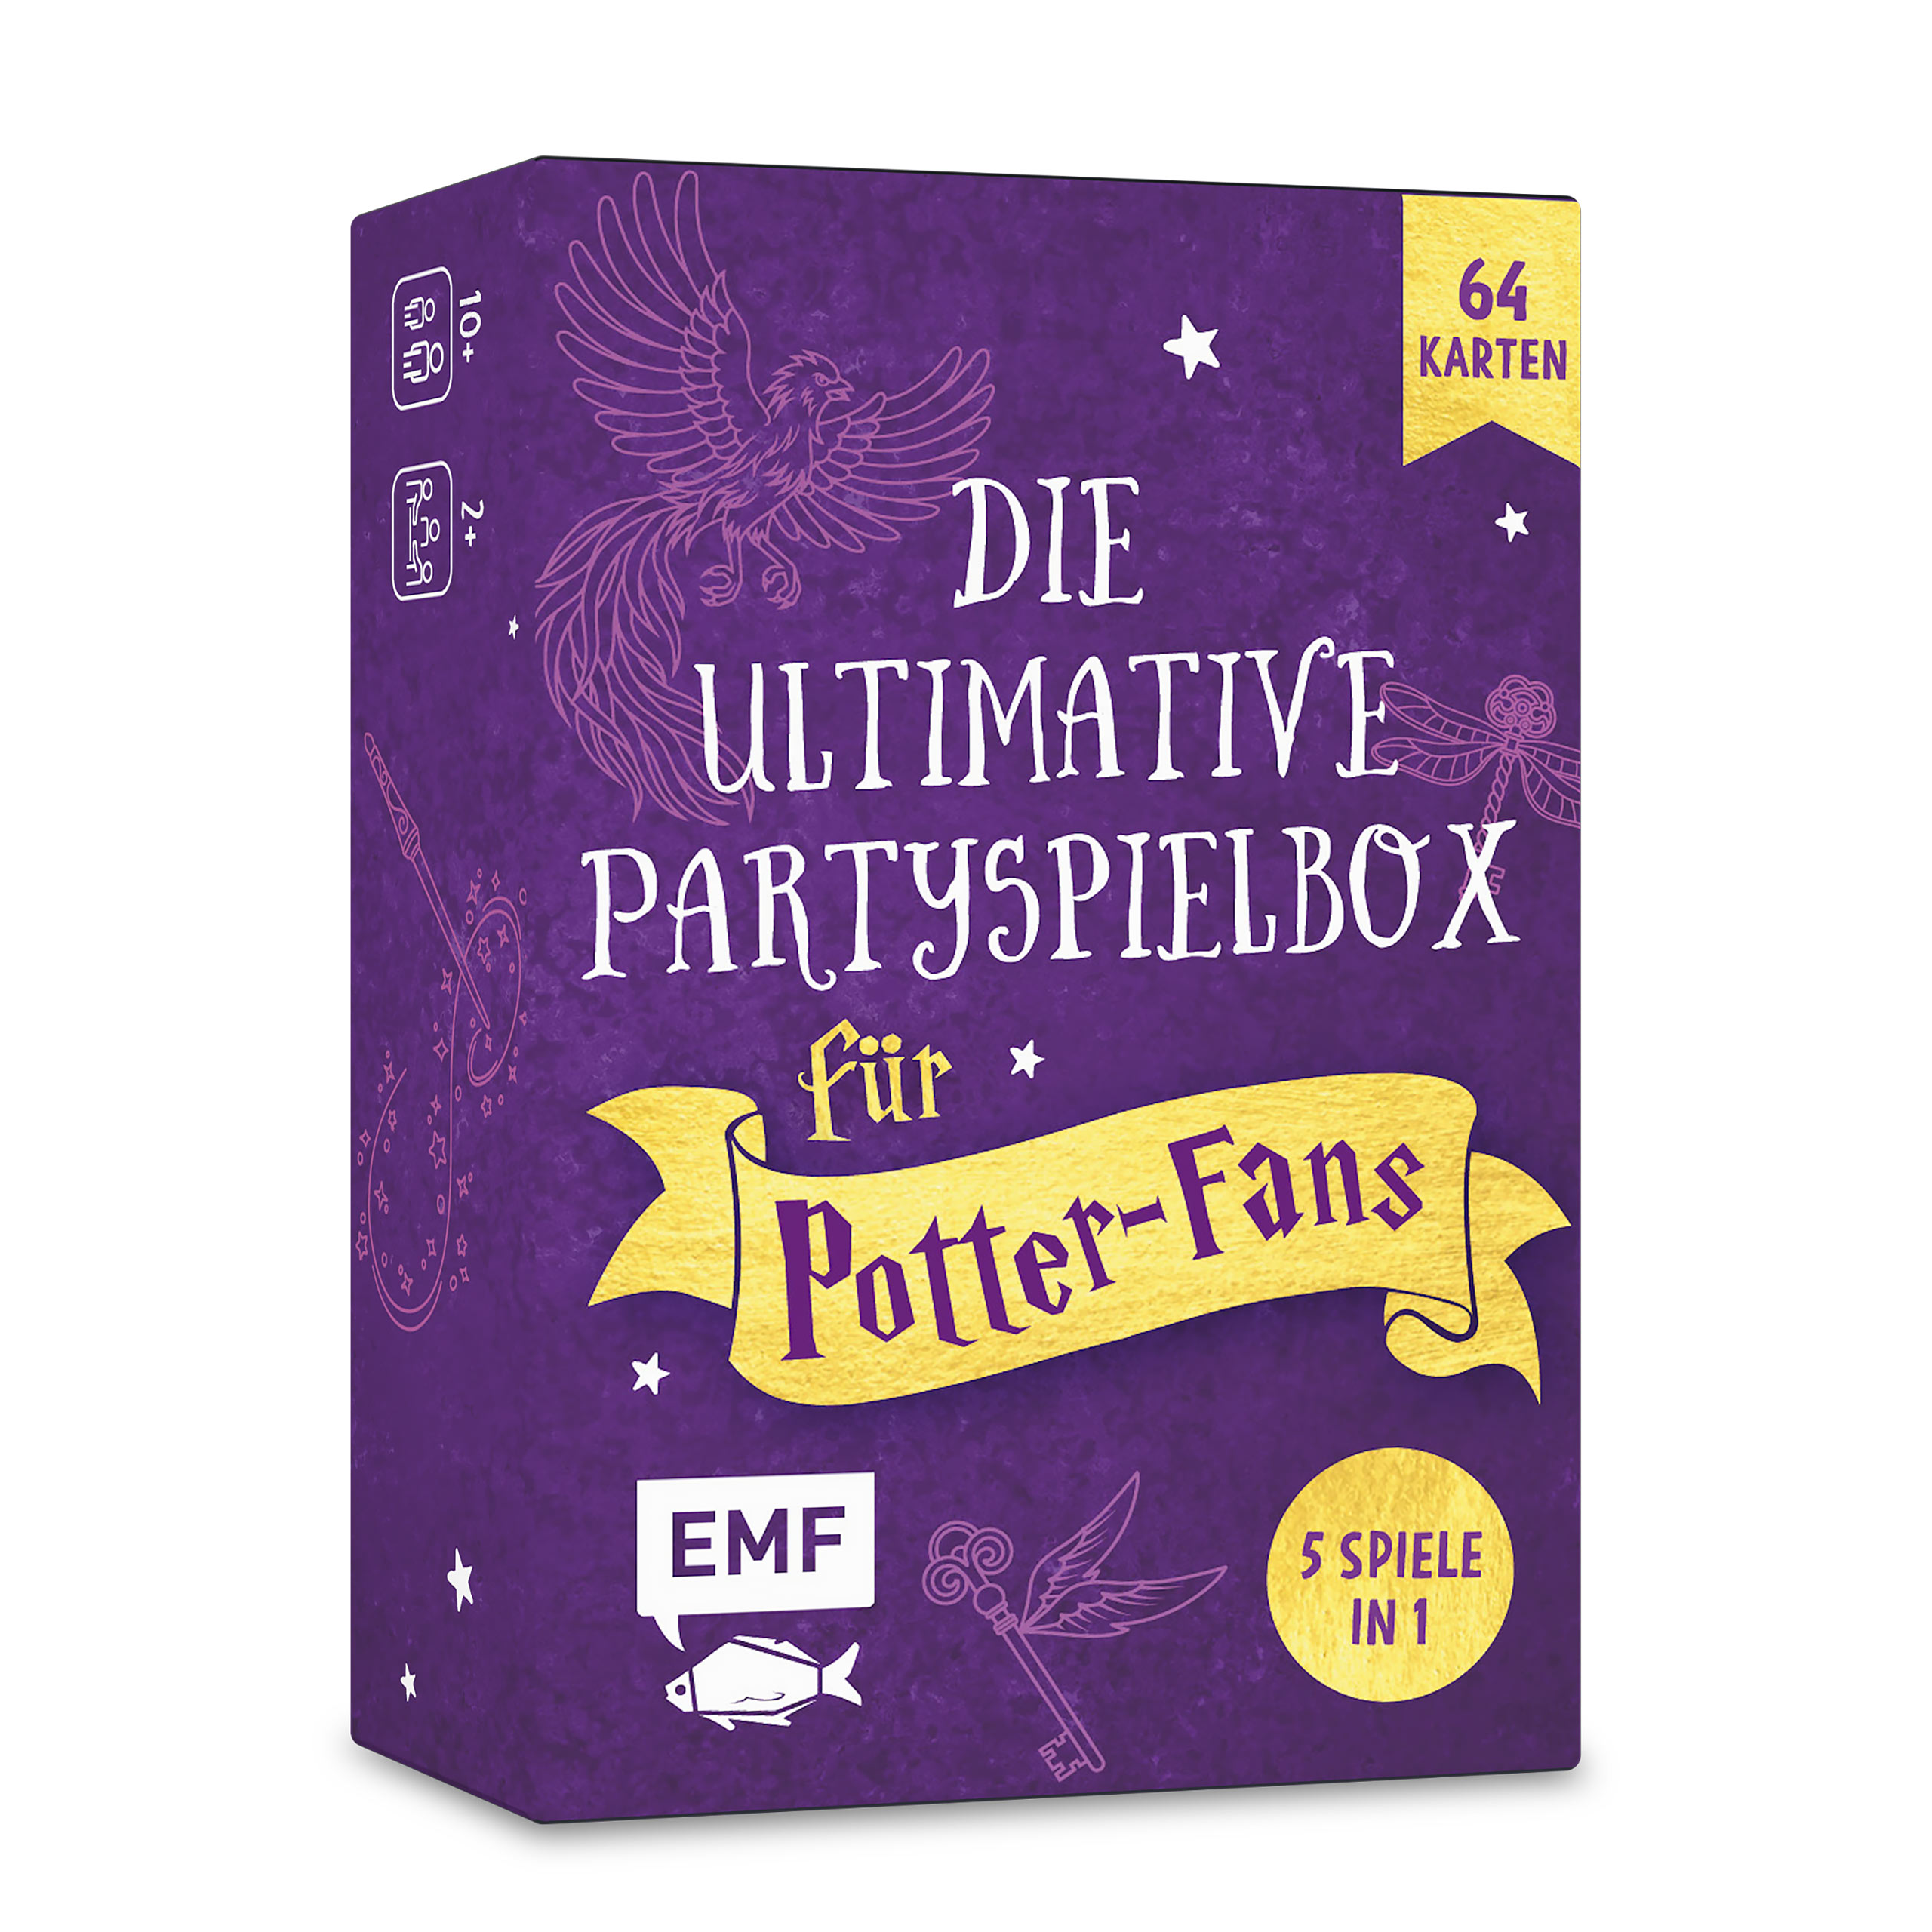 The ultimate party game box for Harry Potter fans - playing cards